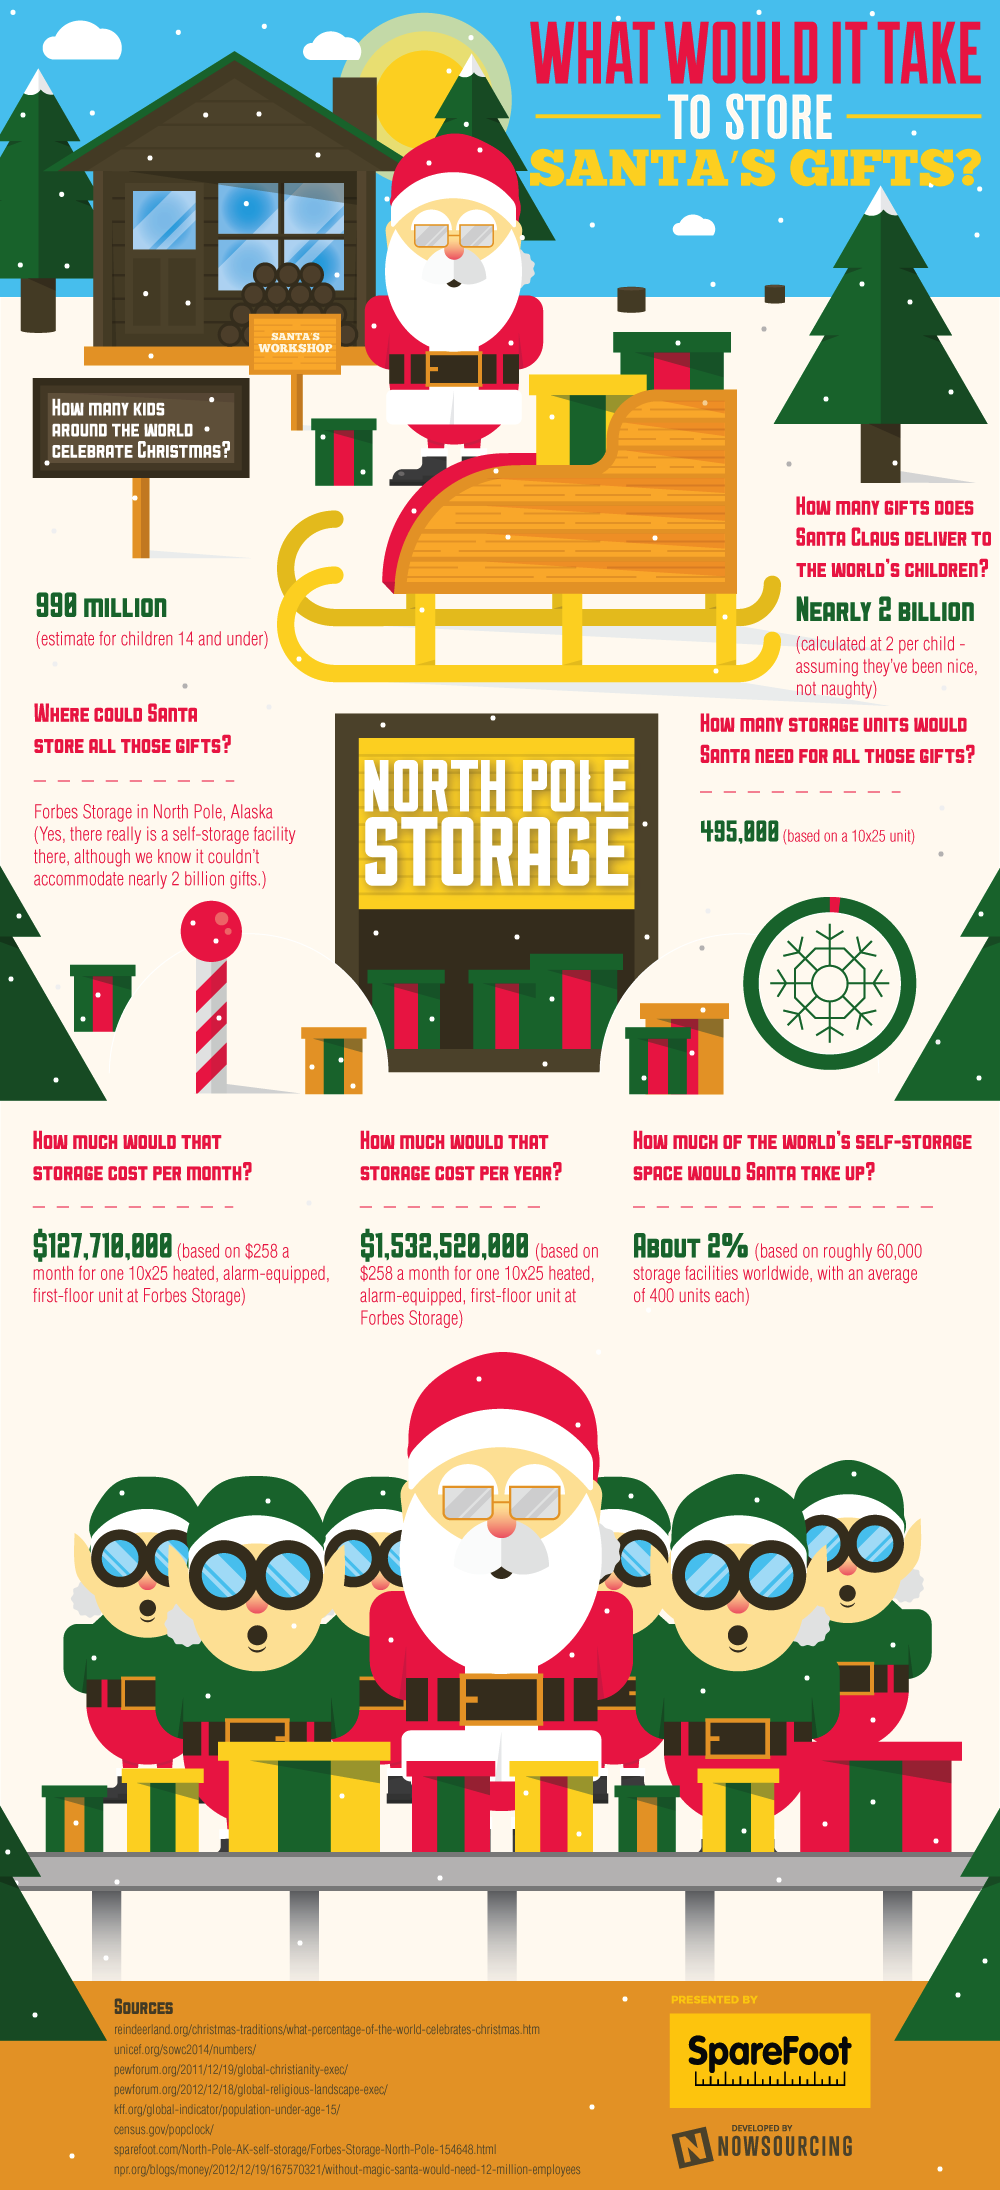 What Would It Take To Store Santa's Gifts?